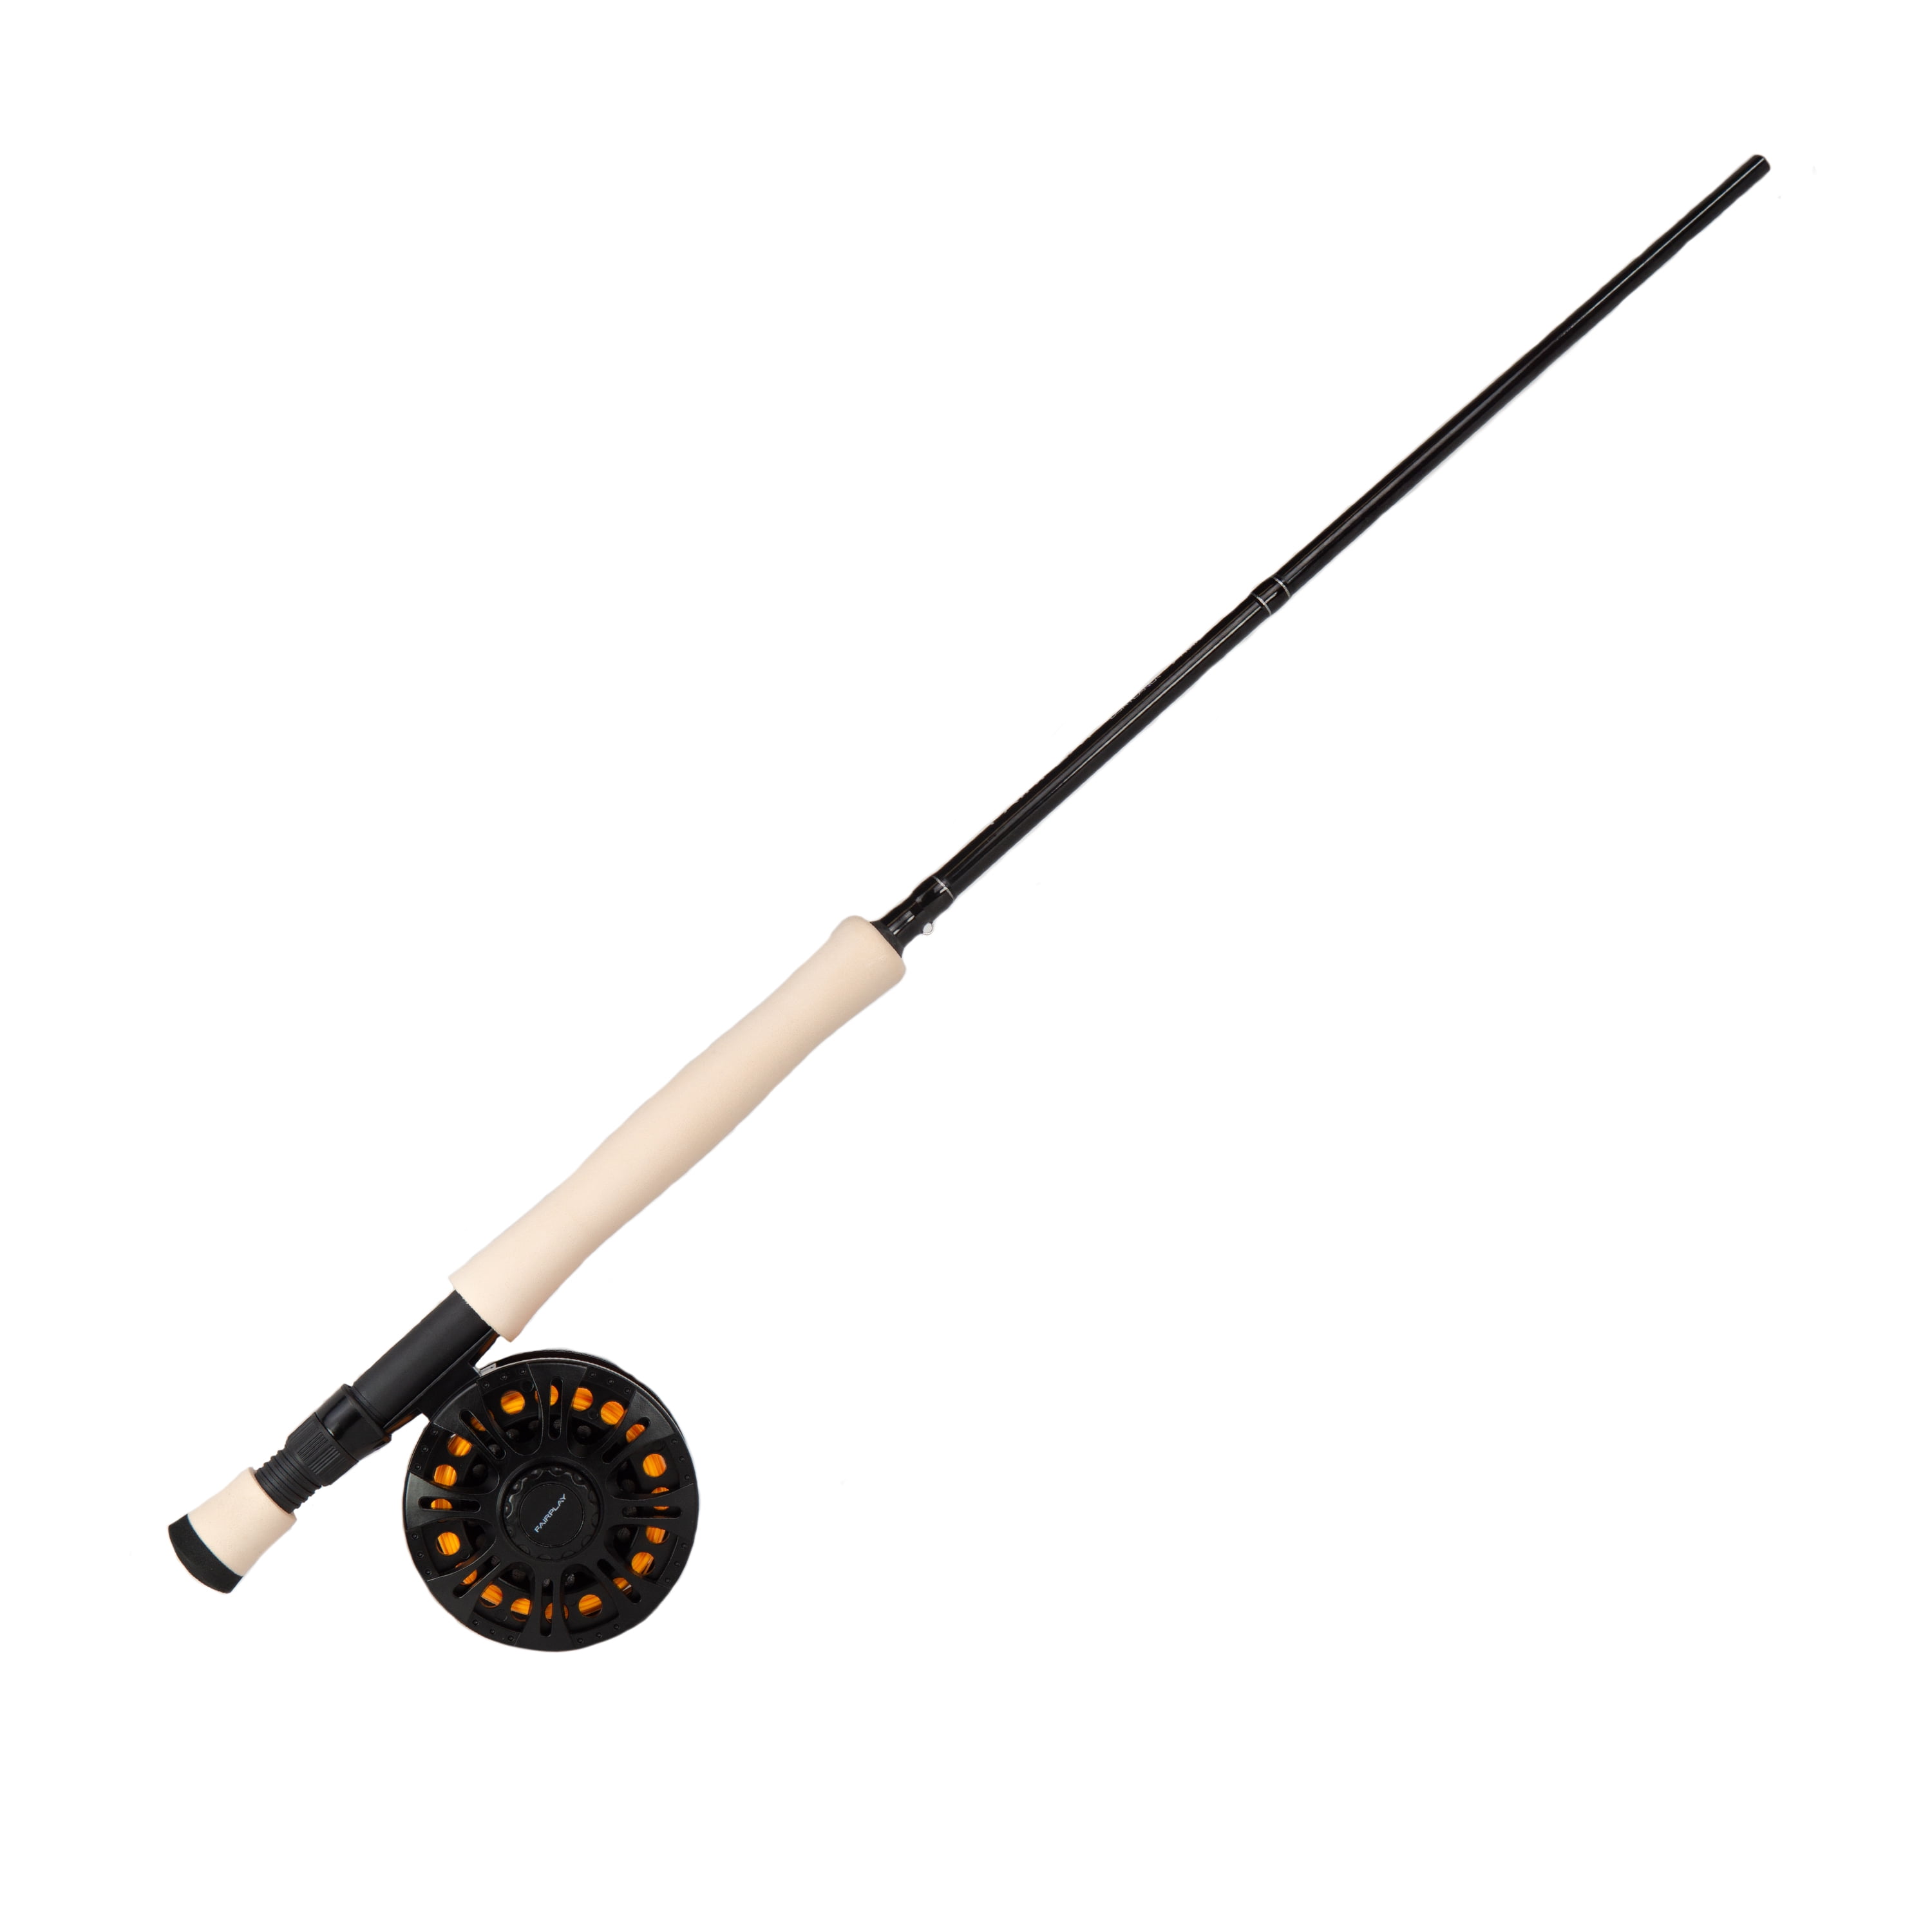 Cortland Fairplay 8' Graphite Fly Rod Combo, 8/9 Weight, 4 Piece, 607644